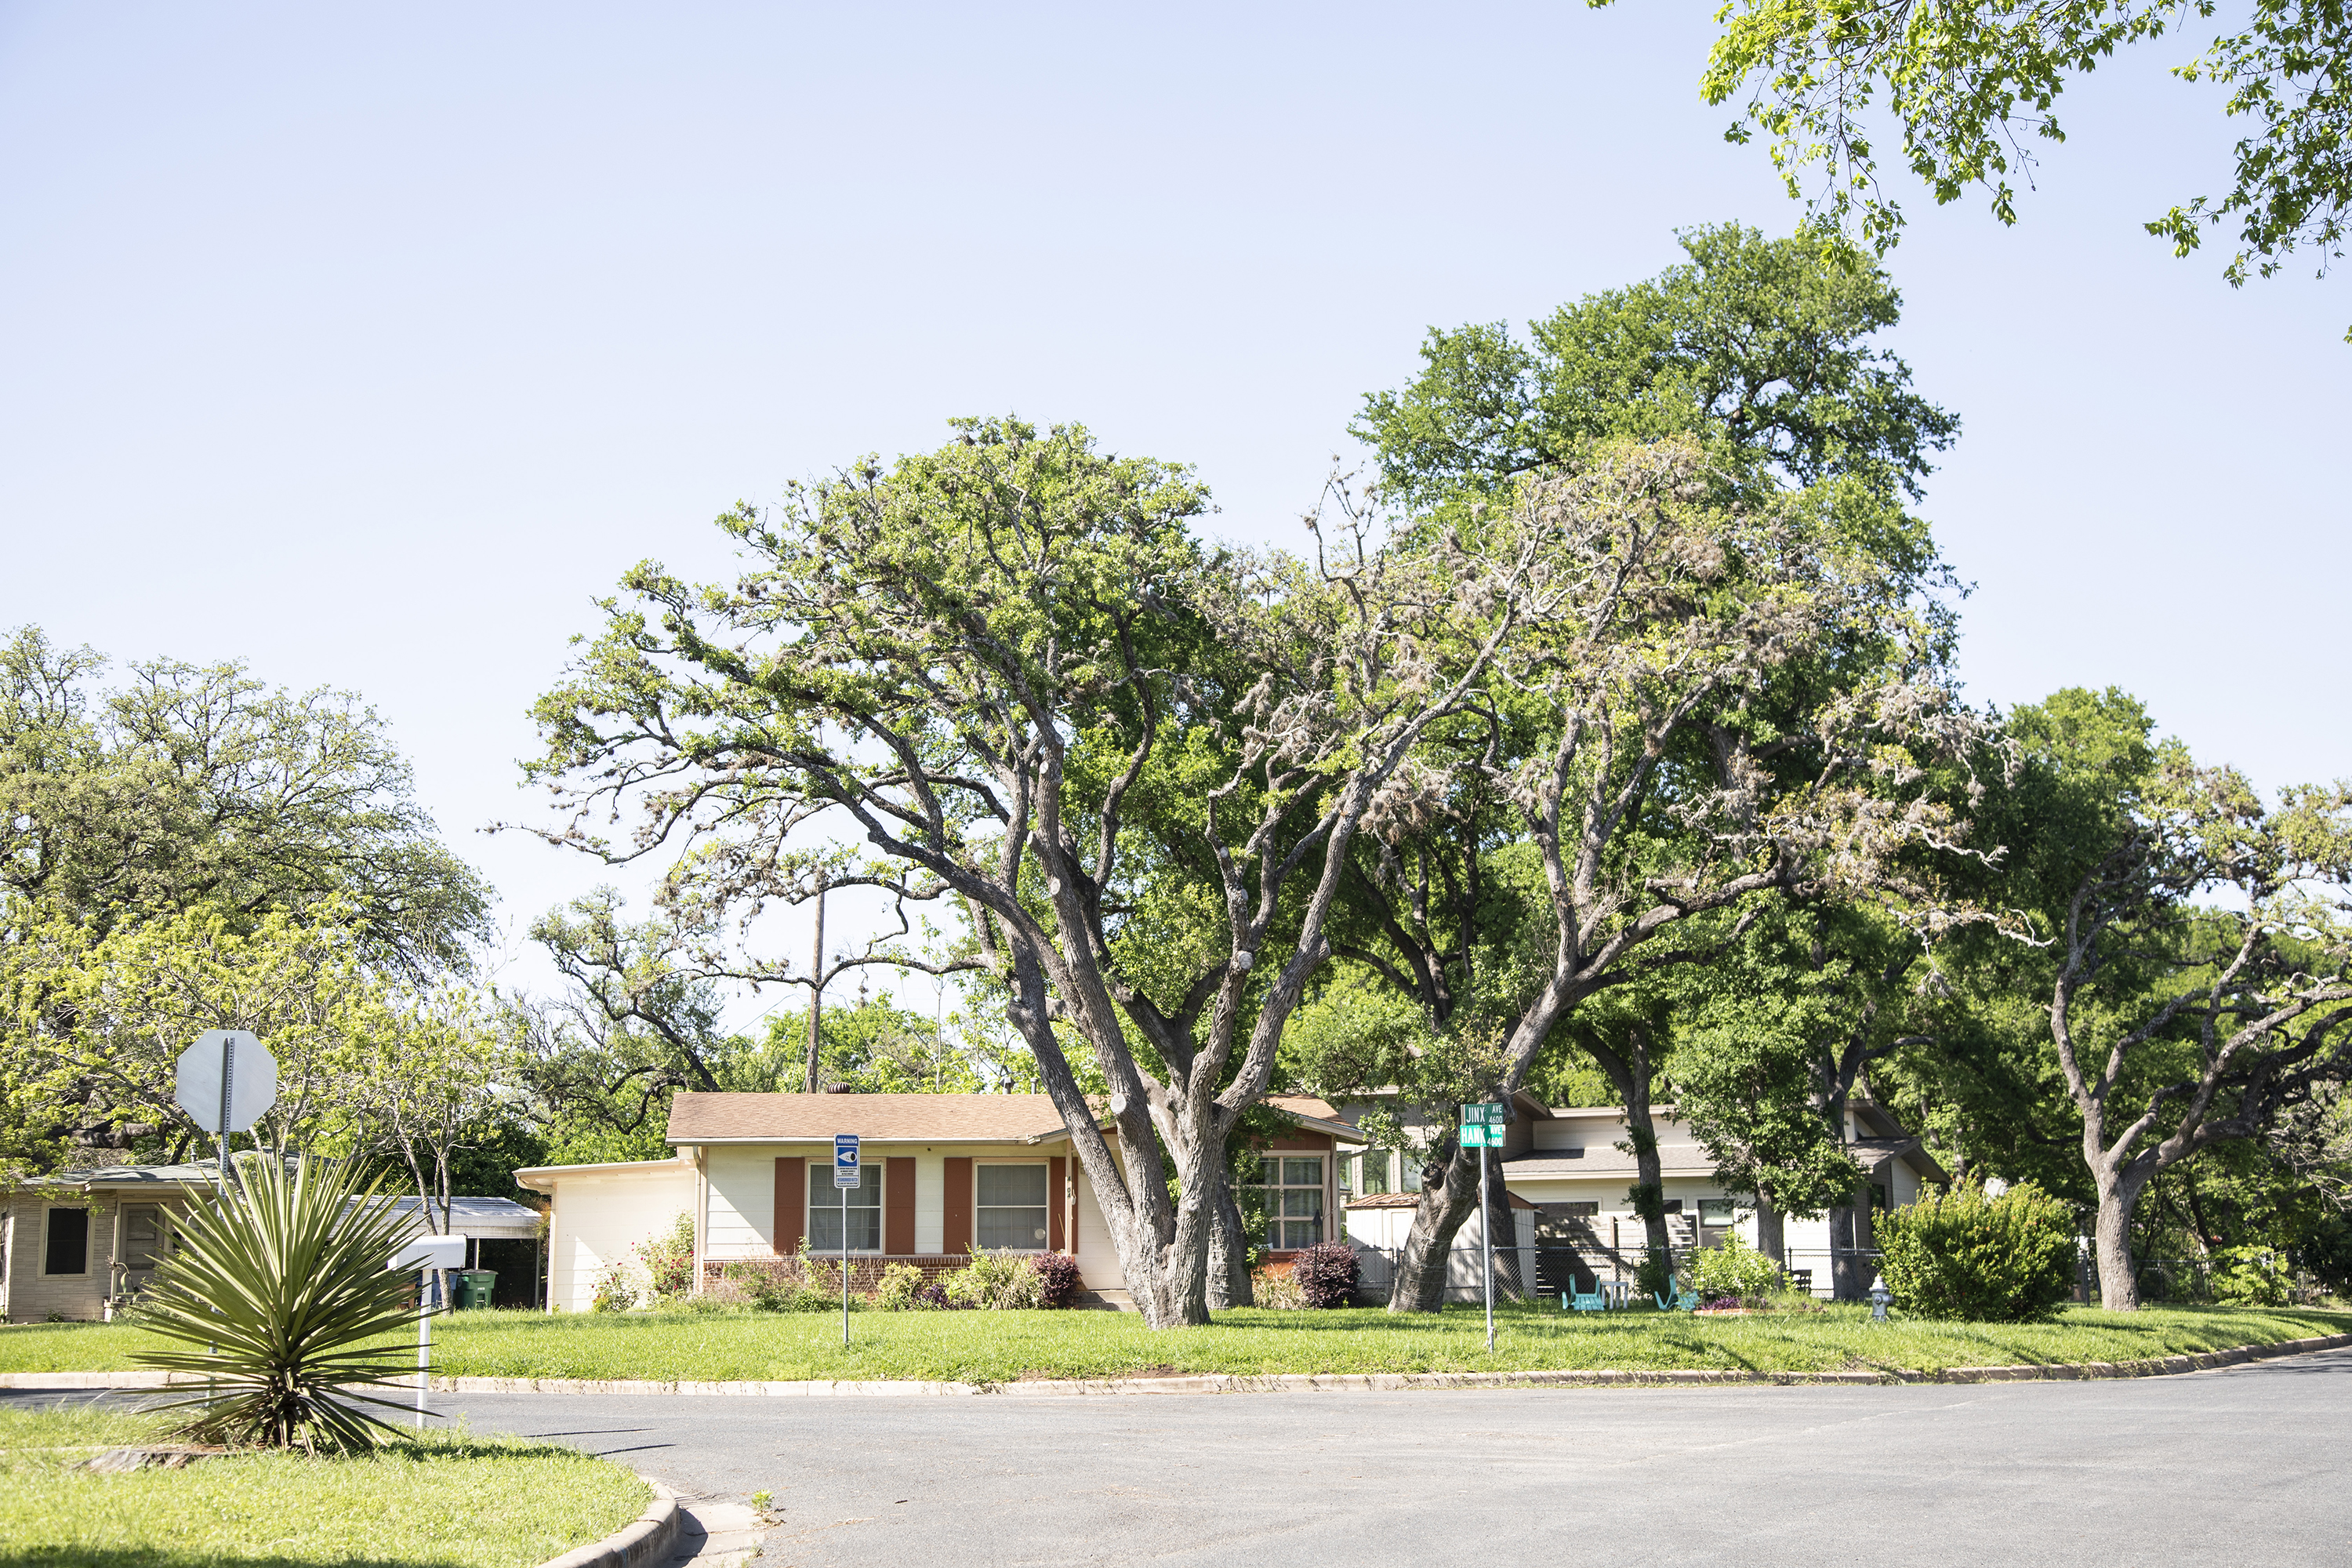 A ranch style home in an Austin neighborhood, with a very large green tree in the front yard and lush vegetation around. 